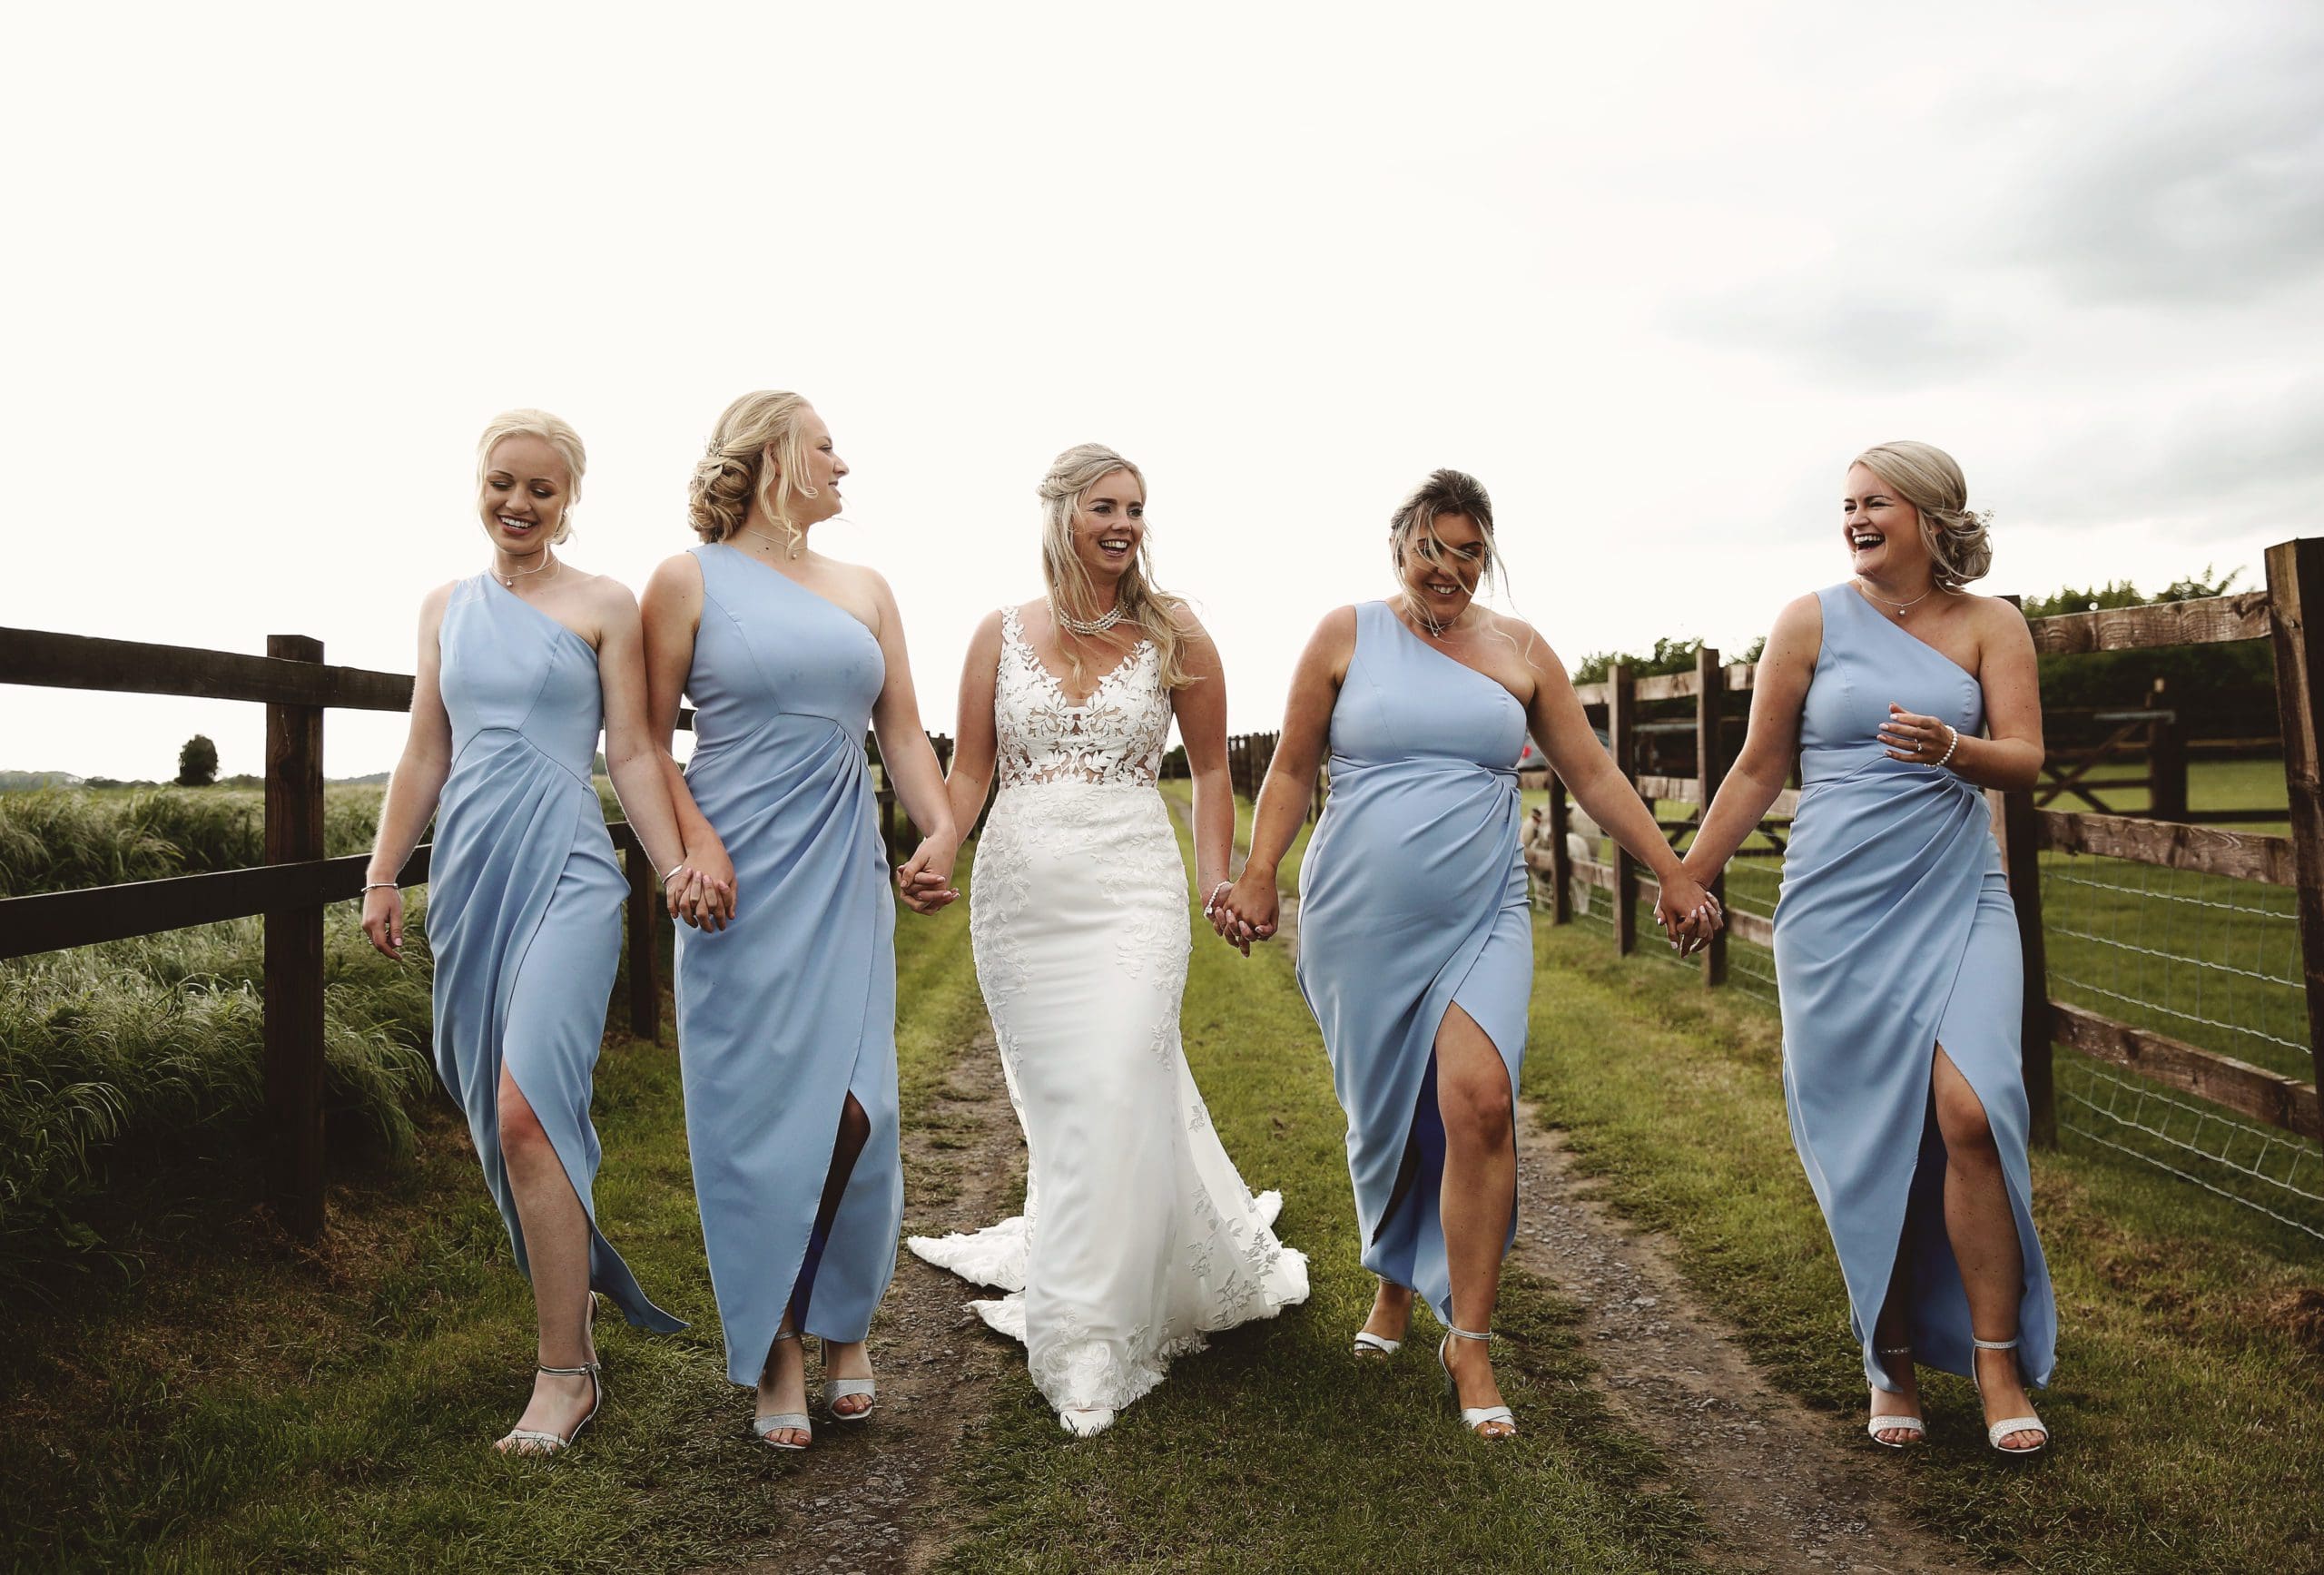 Emily chose the Malia by Blue By Enzoani wedding dress for her big day